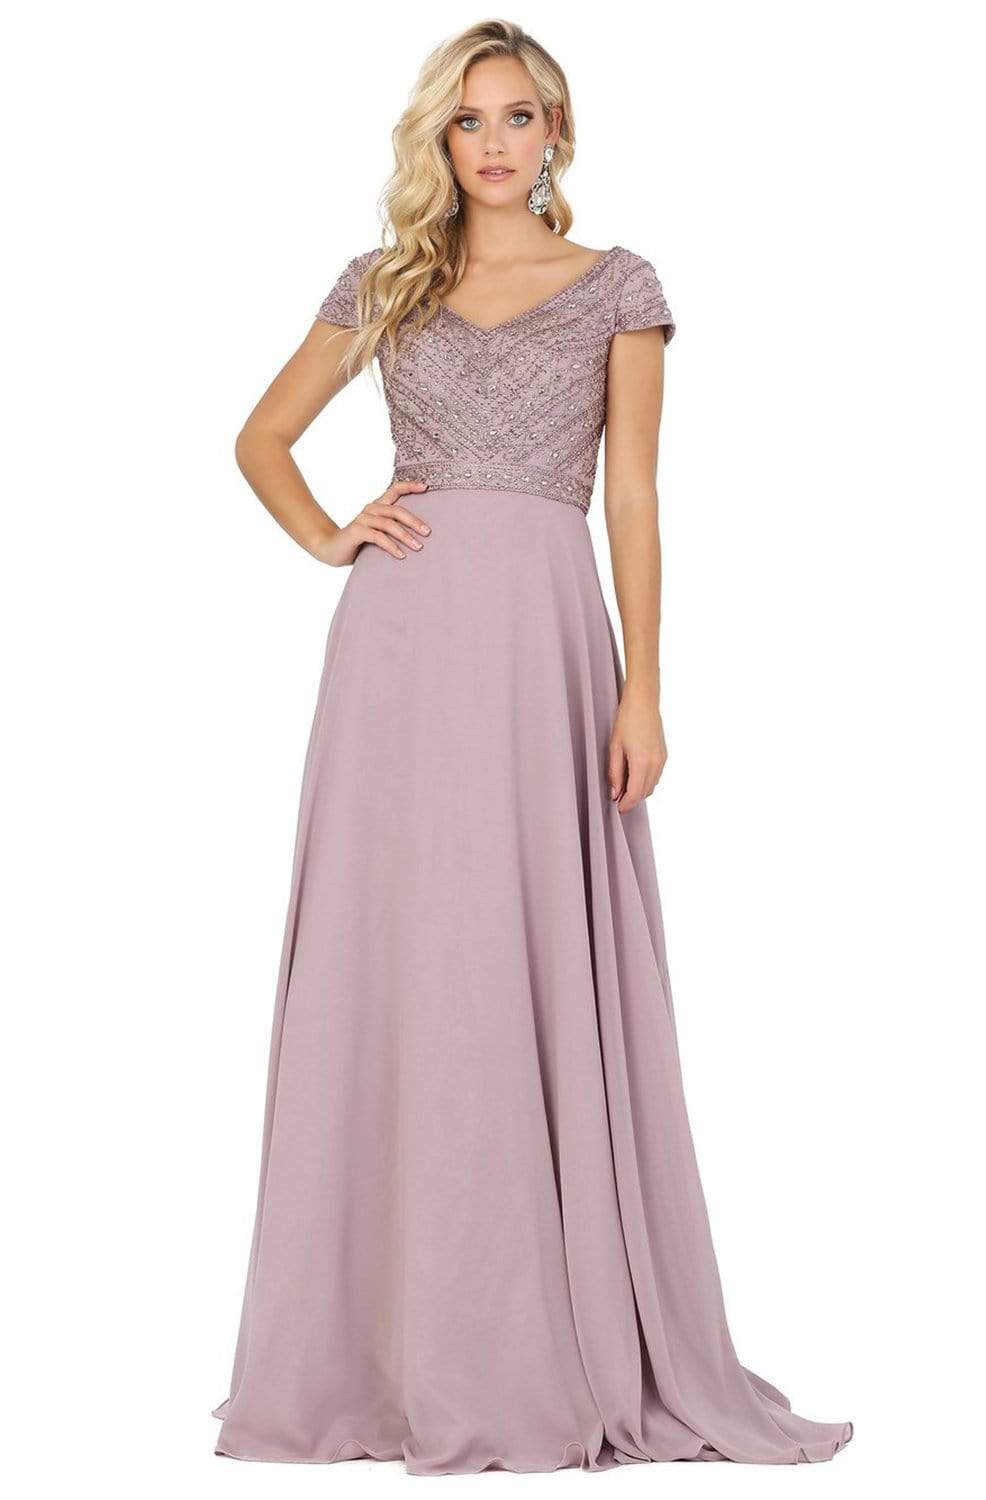 Image of Dancing Queen - 4015 Short Sleeve Beaded Bodice Chiffon Gown